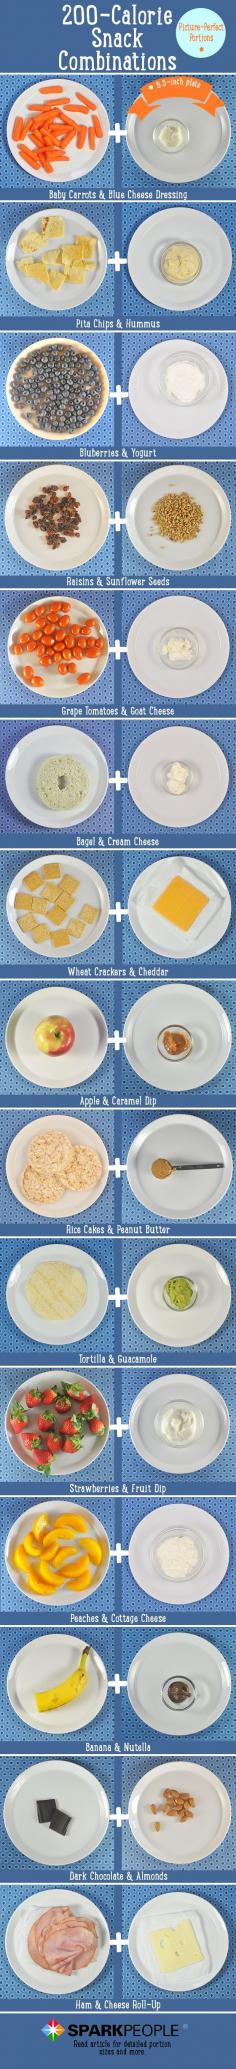 
                    
                        15 Pictures of 200-Calorie Healthy Snack Portions | via @SparkPeople #food #diet #nutrition
                    
                